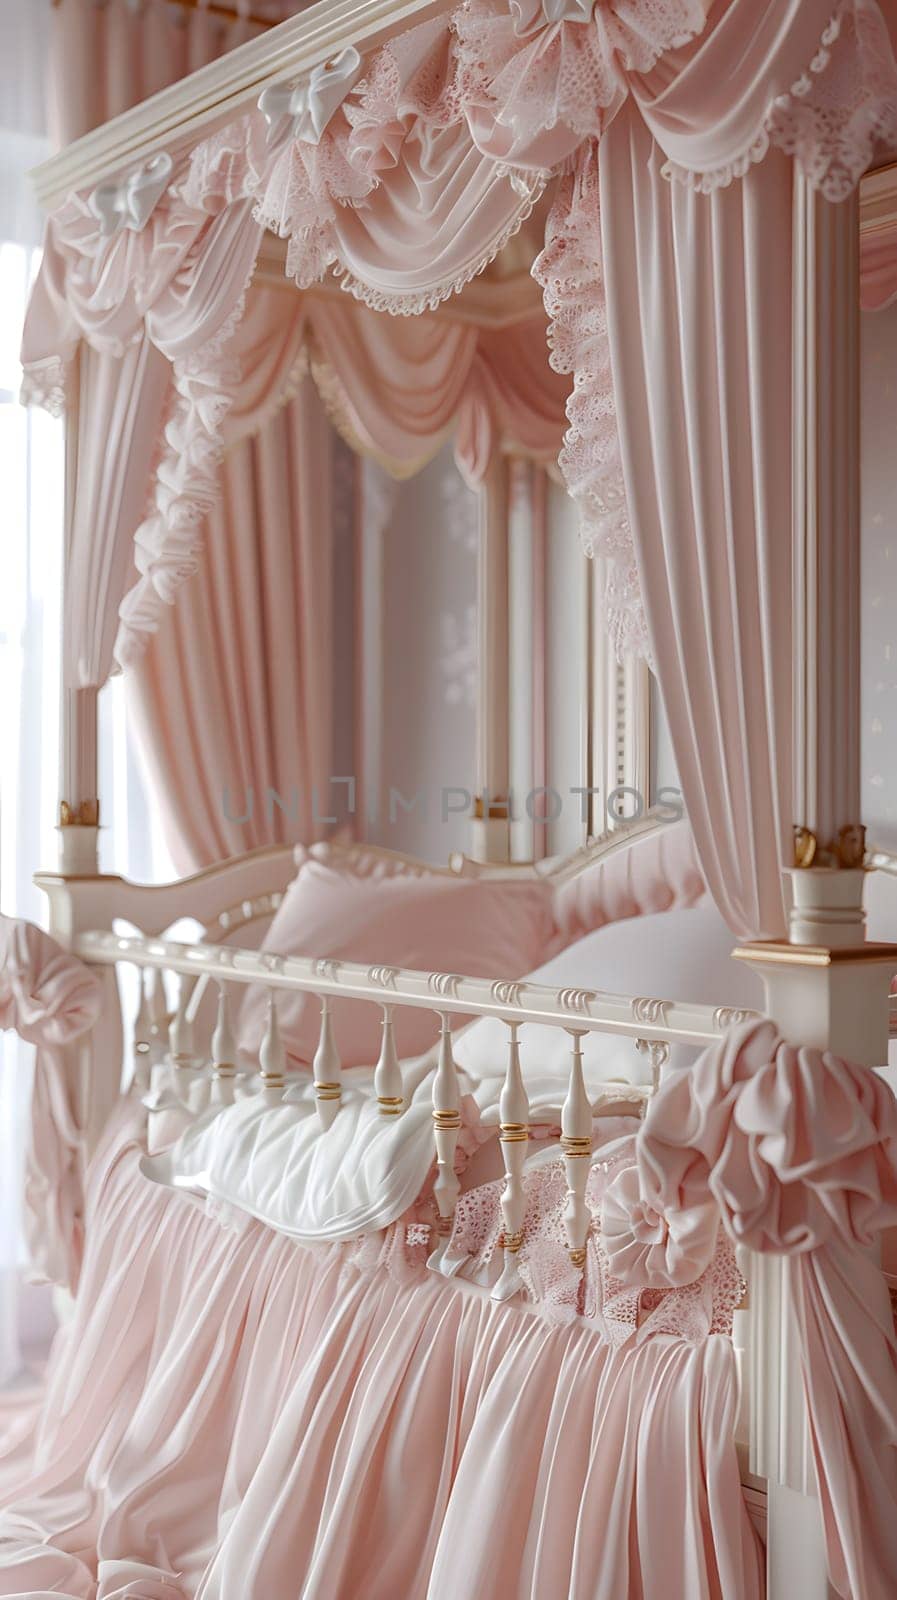 Bed with canopy and pink curtains in room with hardwood flooring by Nadtochiy